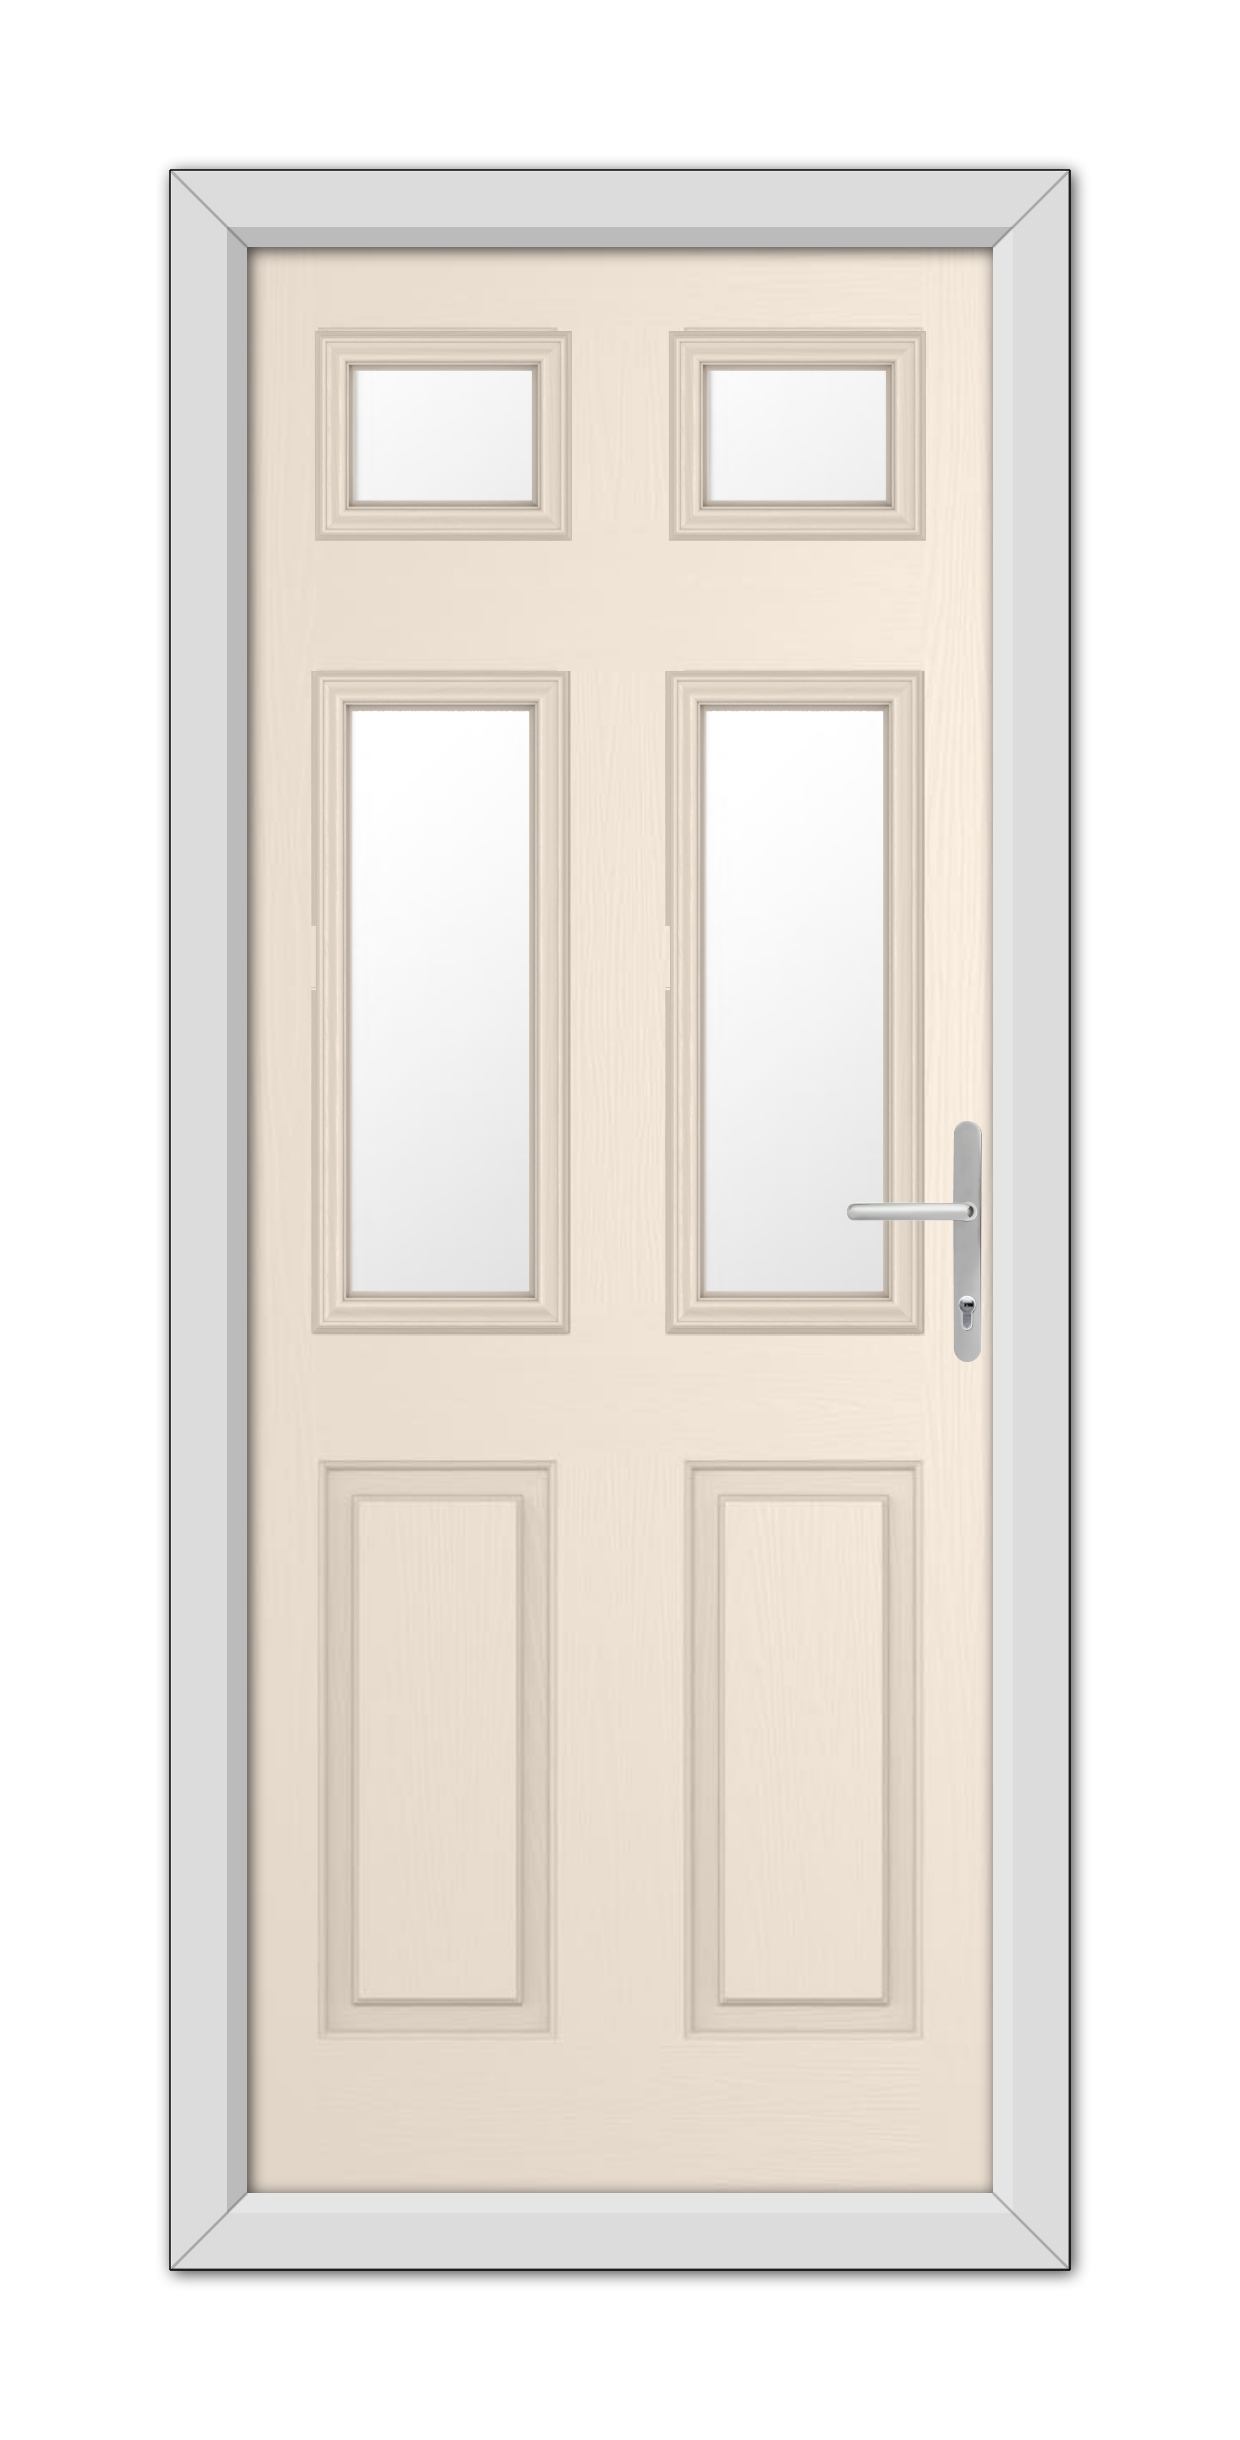 A modern Cream Middleton Glazed 4 Composite Door 48mm Timber Core with glass panels and a silver handle, set within a gray frame.